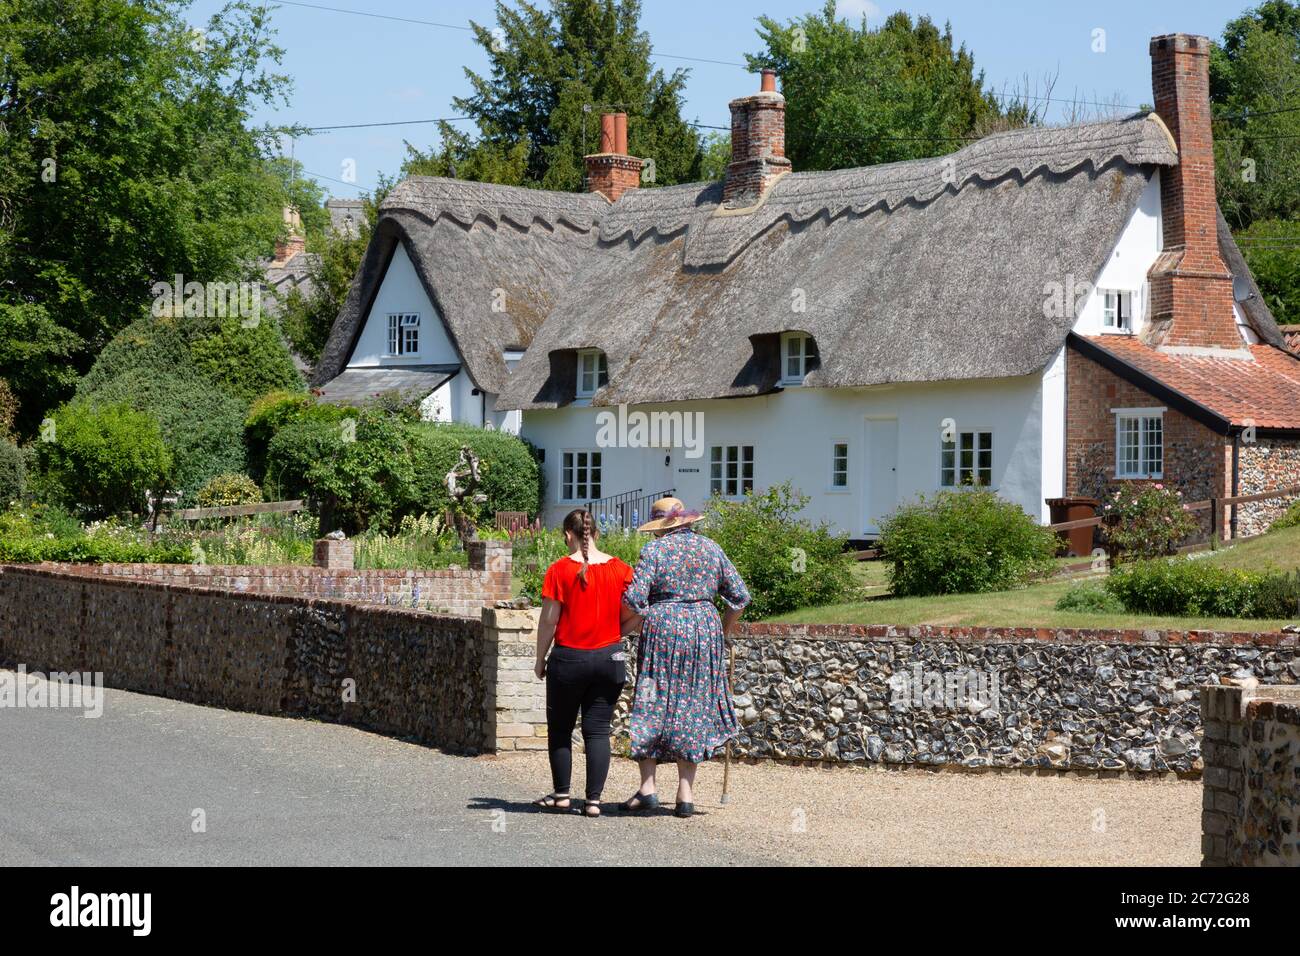 English village street scene in summer; two women walking on a street in front of a traditional thatched cottage, Dalham village, Suffolk England UK Stock Photo